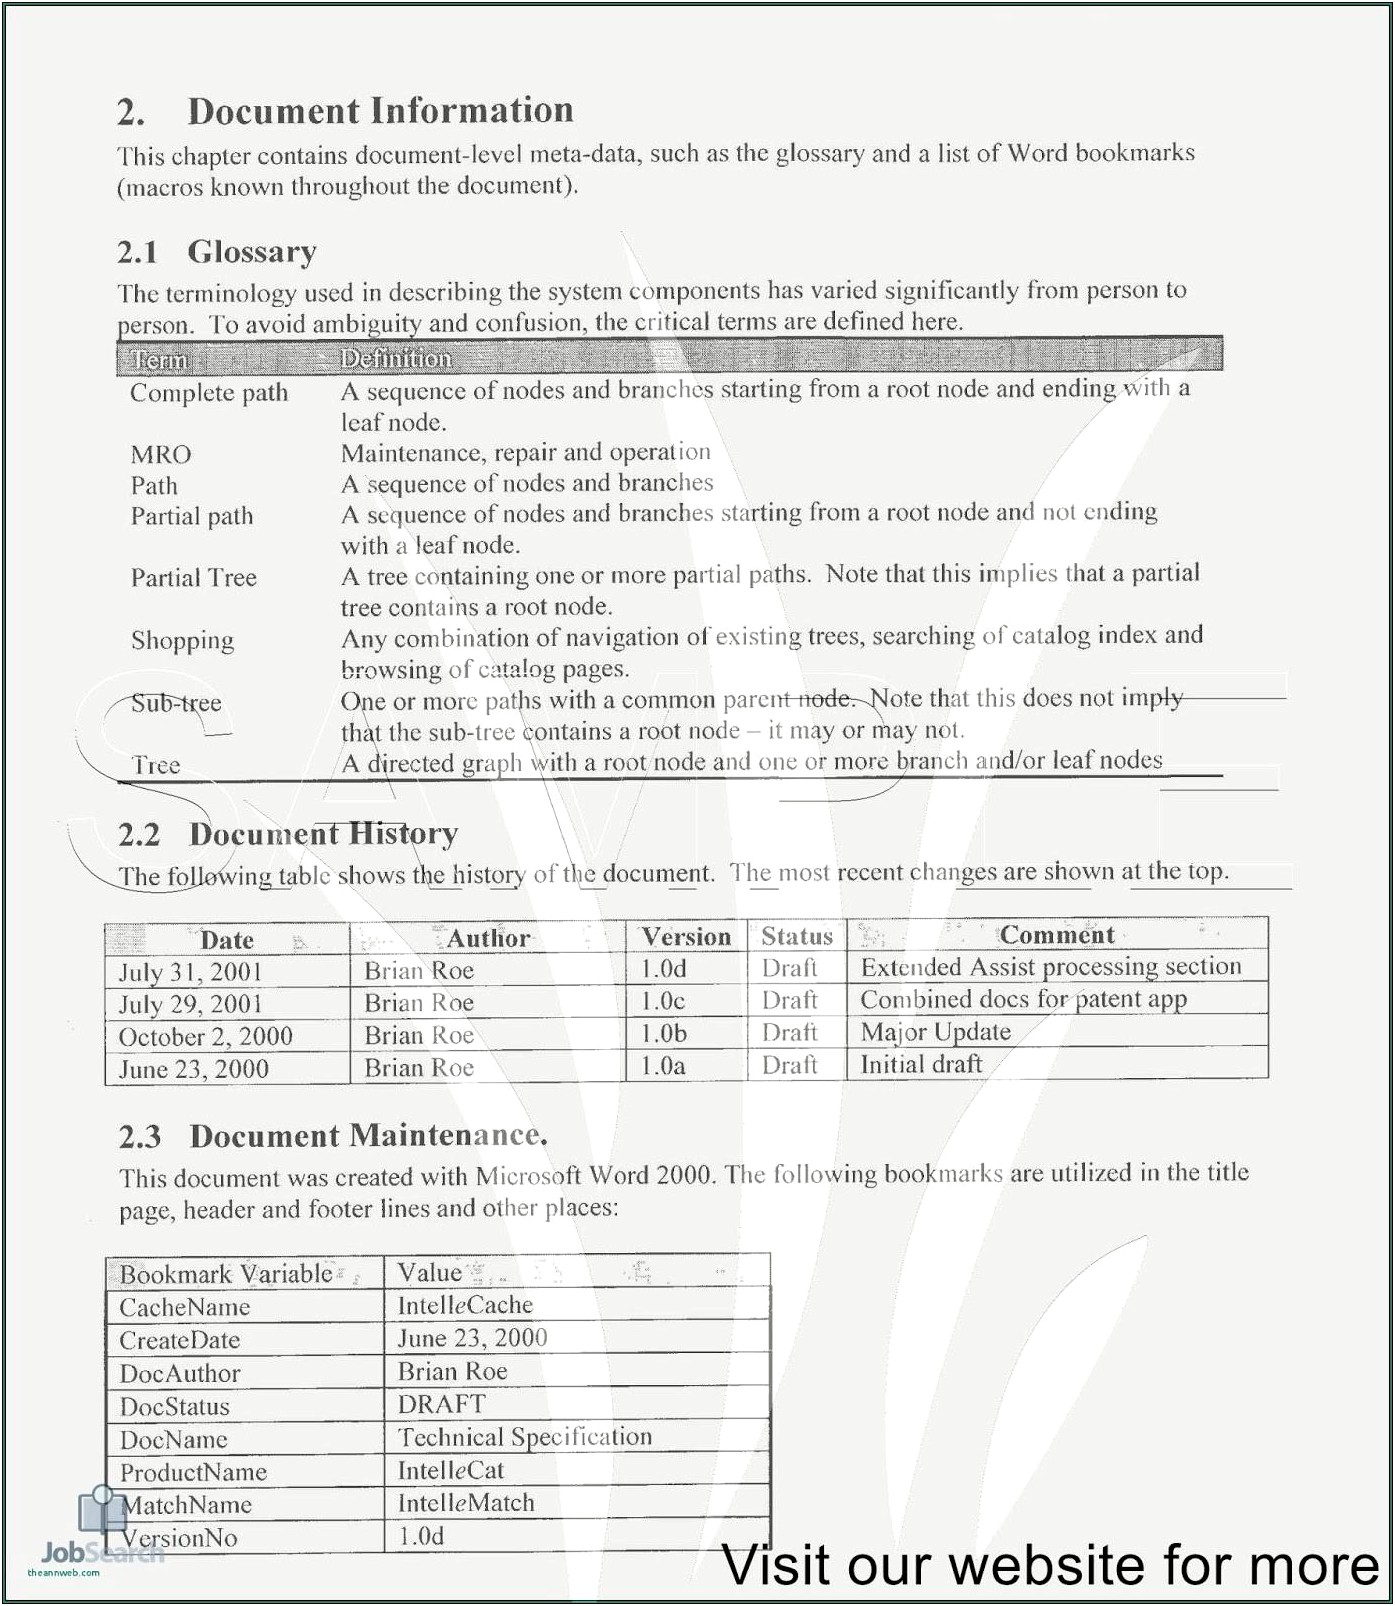 Example Of Child Care Worker Resume